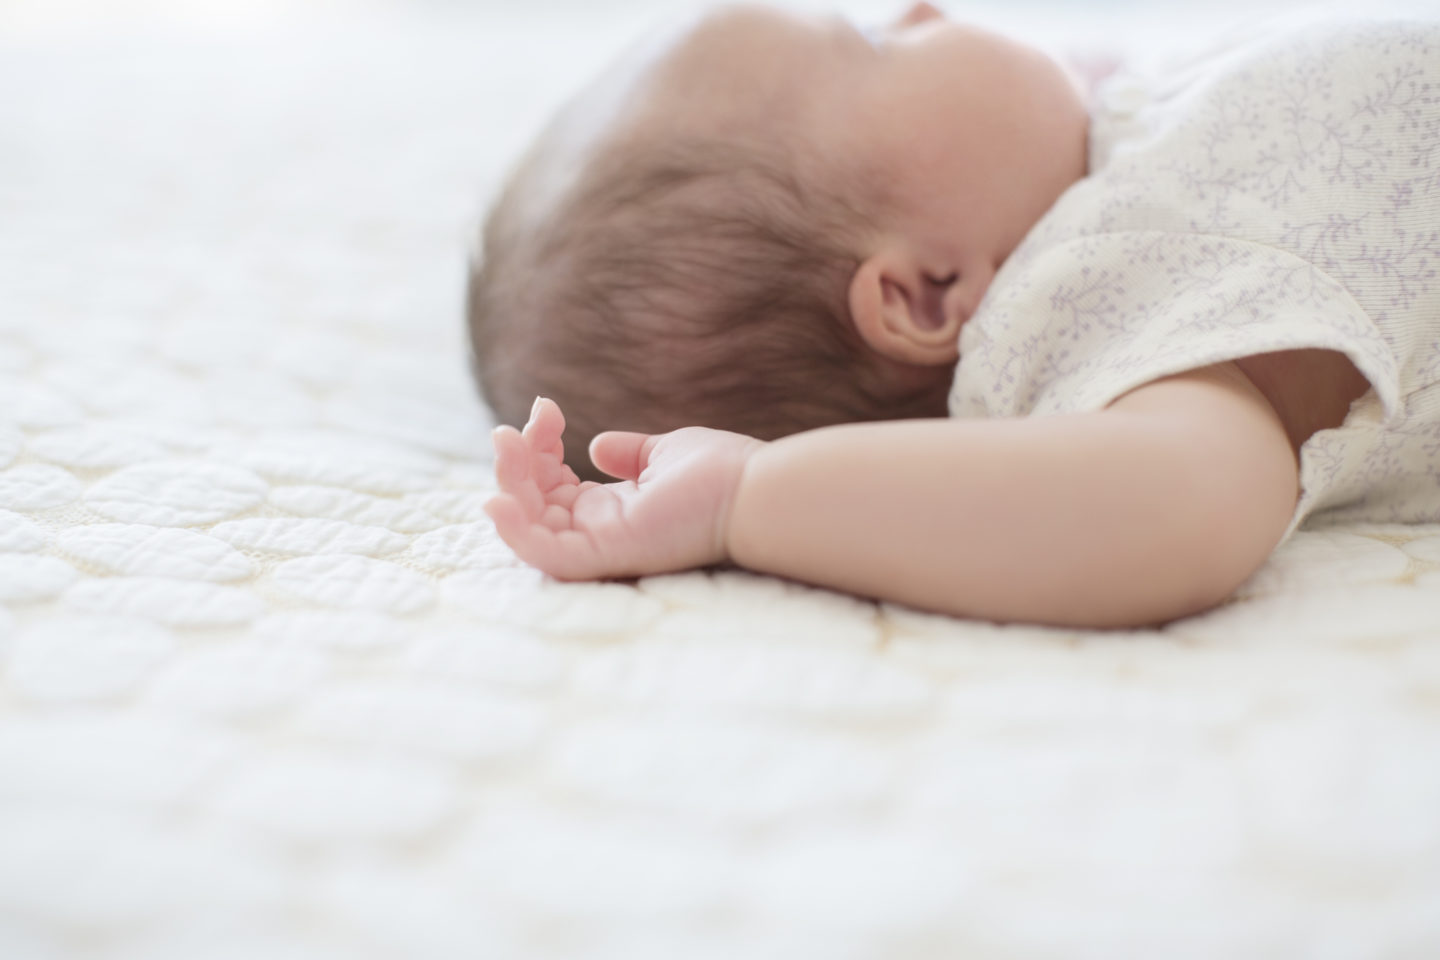 What You Need To Know About Baby Boxes and Sudden Infant Death Syndrome